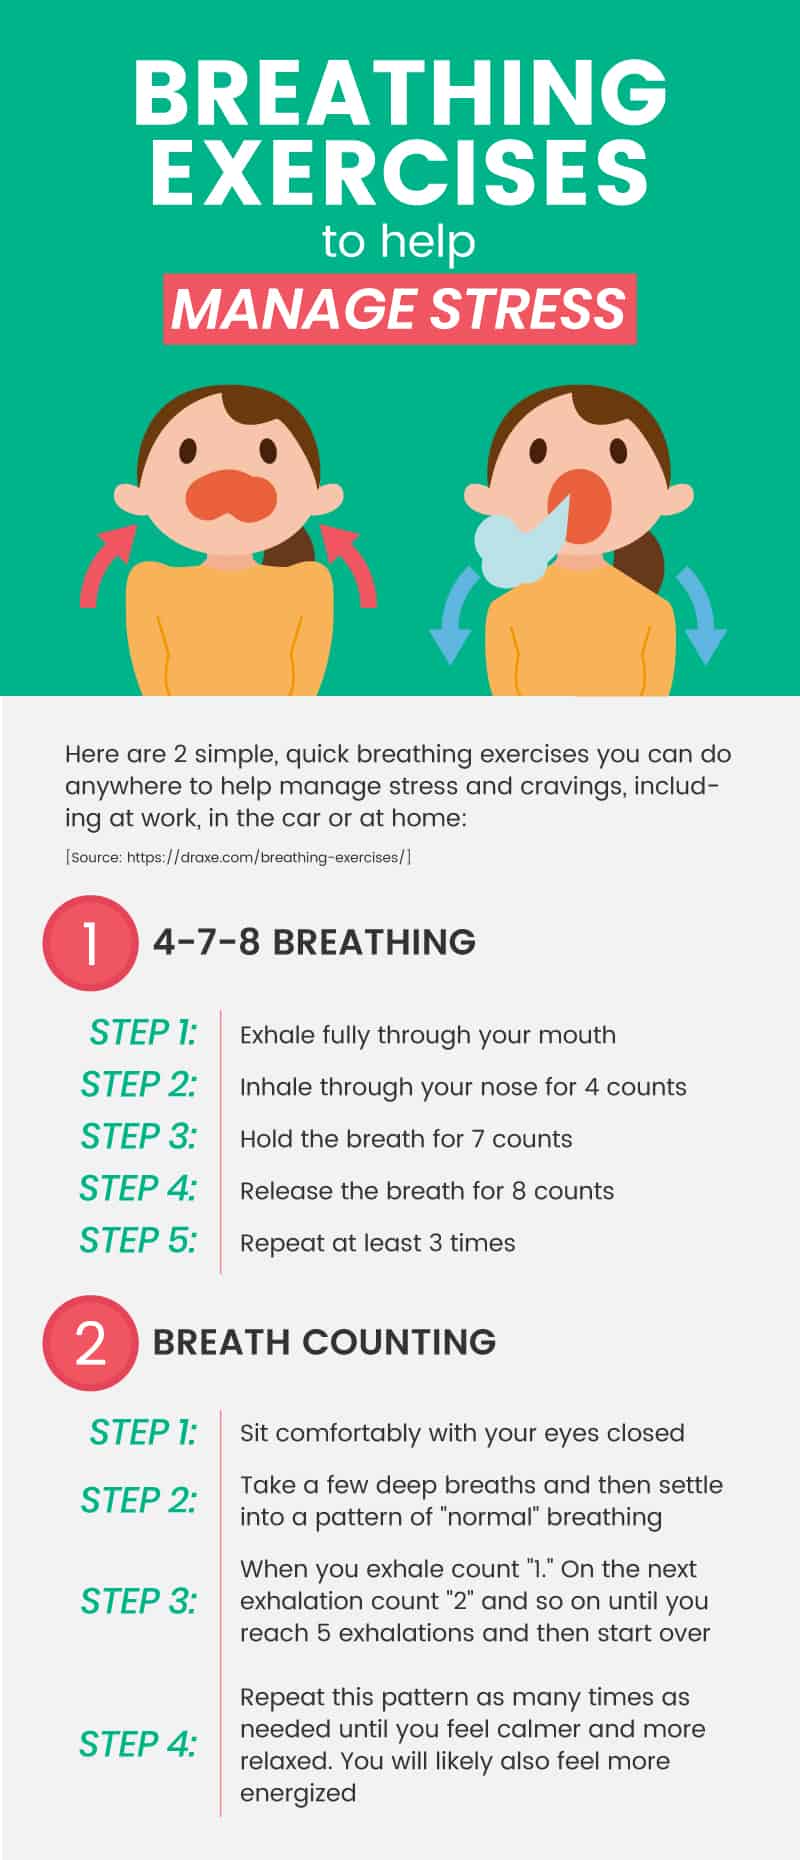 Quitting smoking: breathing exercises - Dr. Axe 